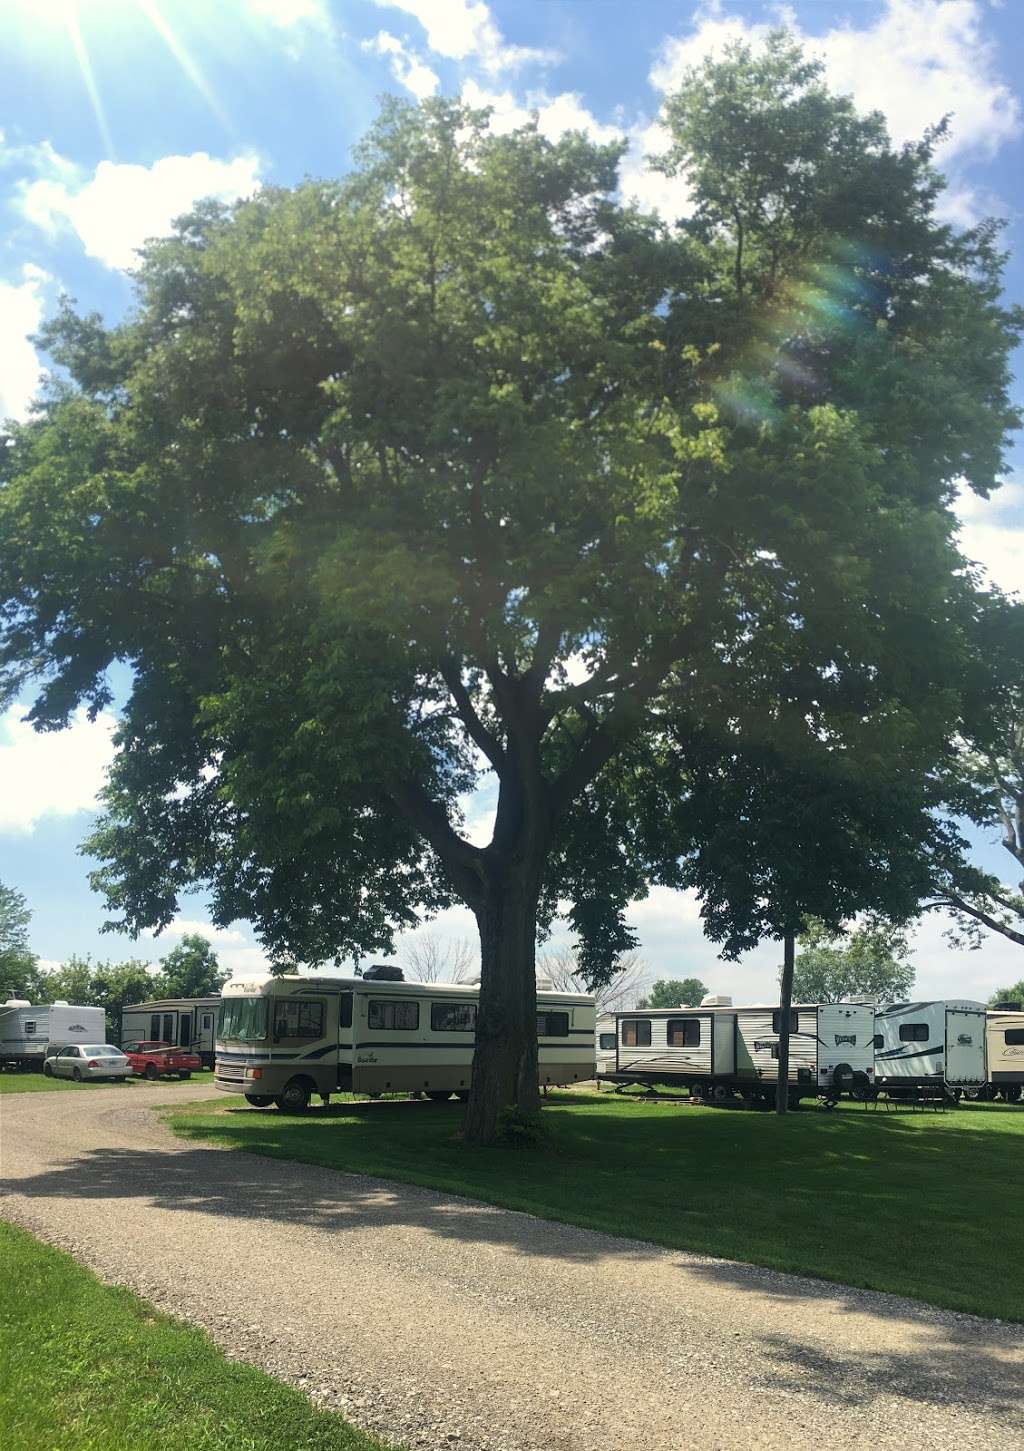 Martins Camping Ground | 9729, 725 Cherry Hill Rd, Joliet, IL 60433 | Phone: (815) 726-3173